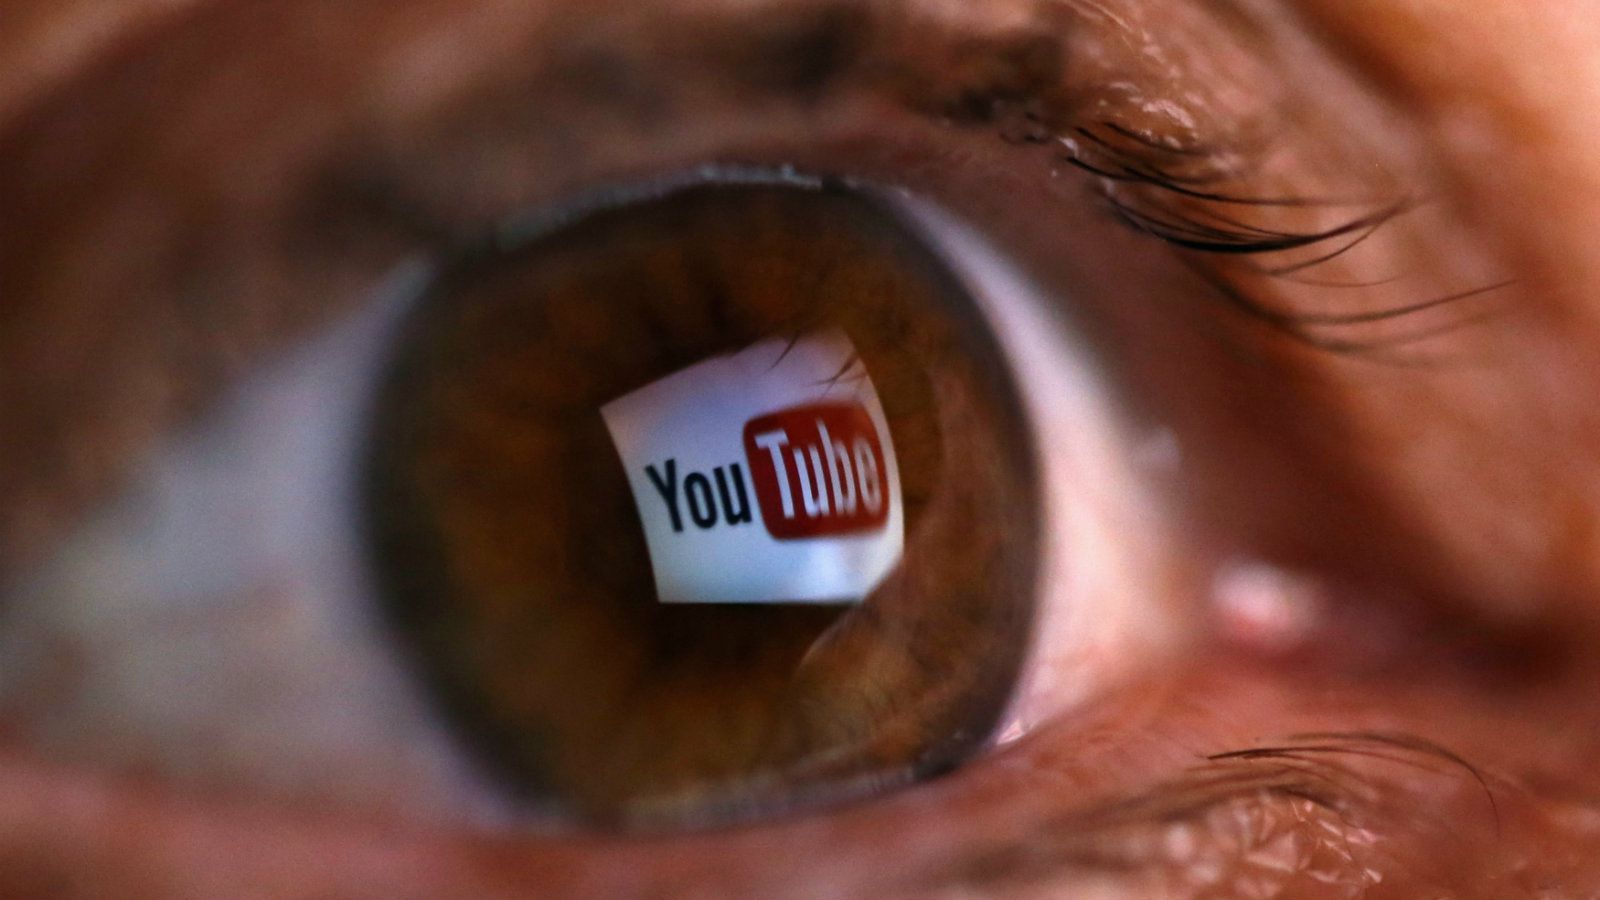 Image: When whining becomes a weapon: The latest Youtube ad-pocalypse